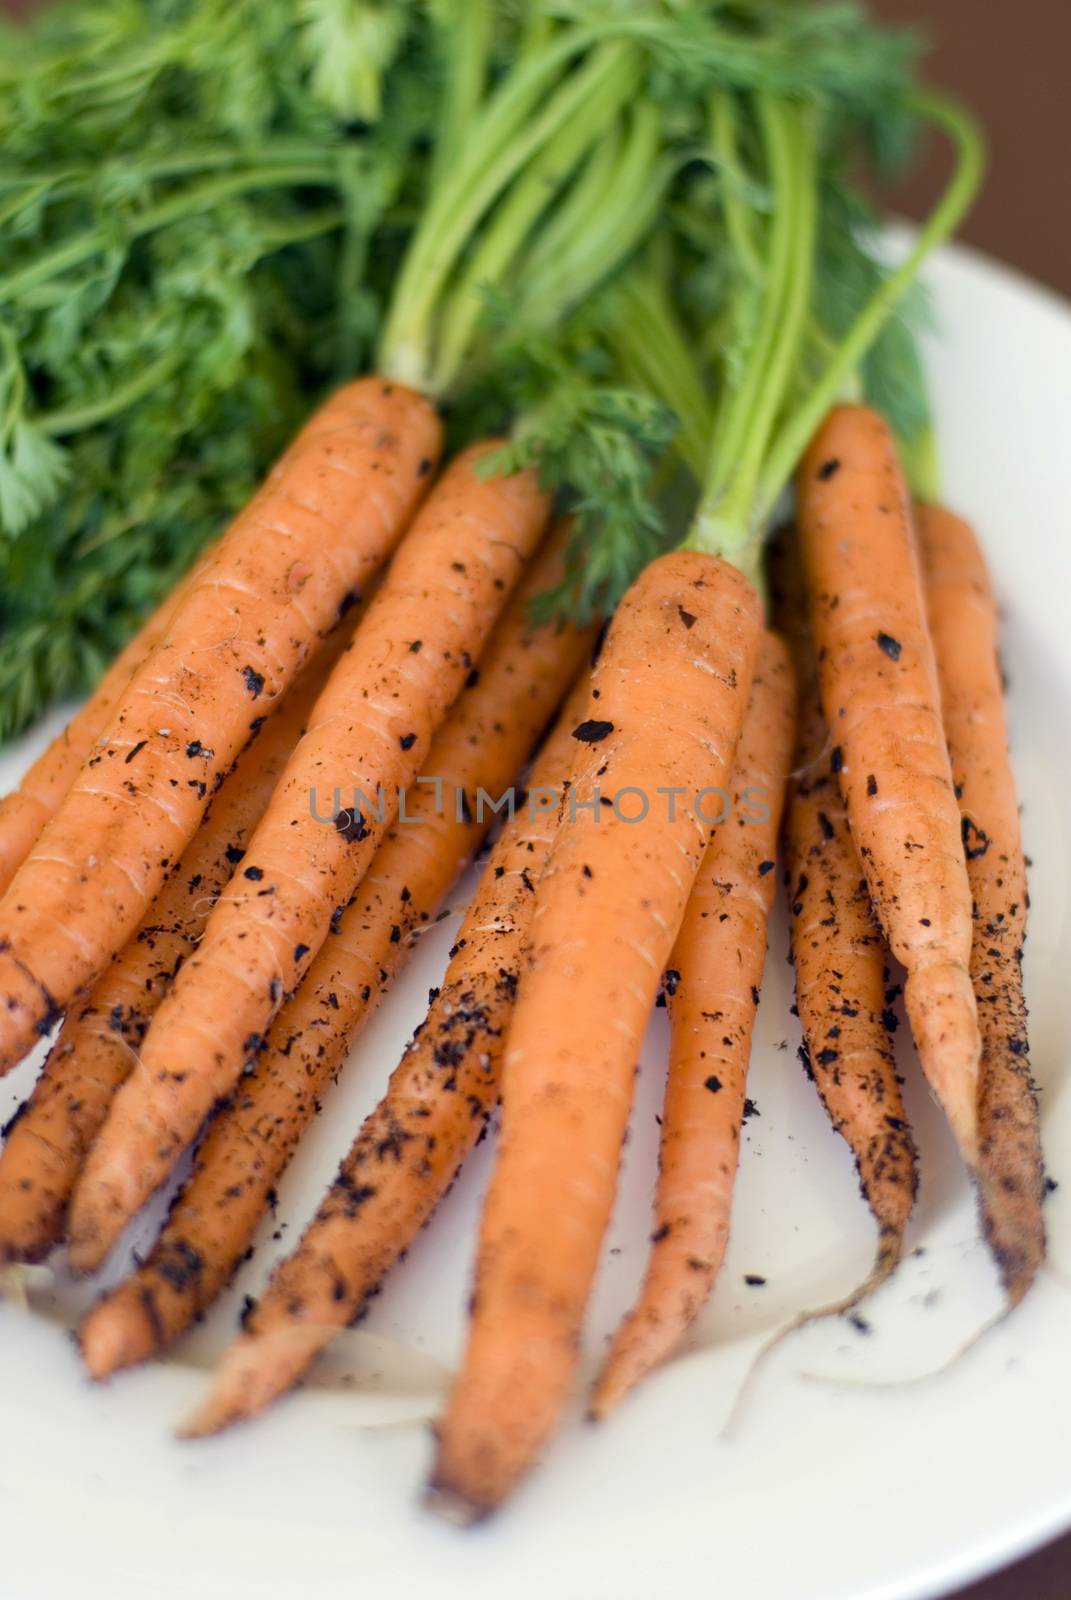 Freshly harvested bunch of raw carrots with bits of soil and green tops on plate